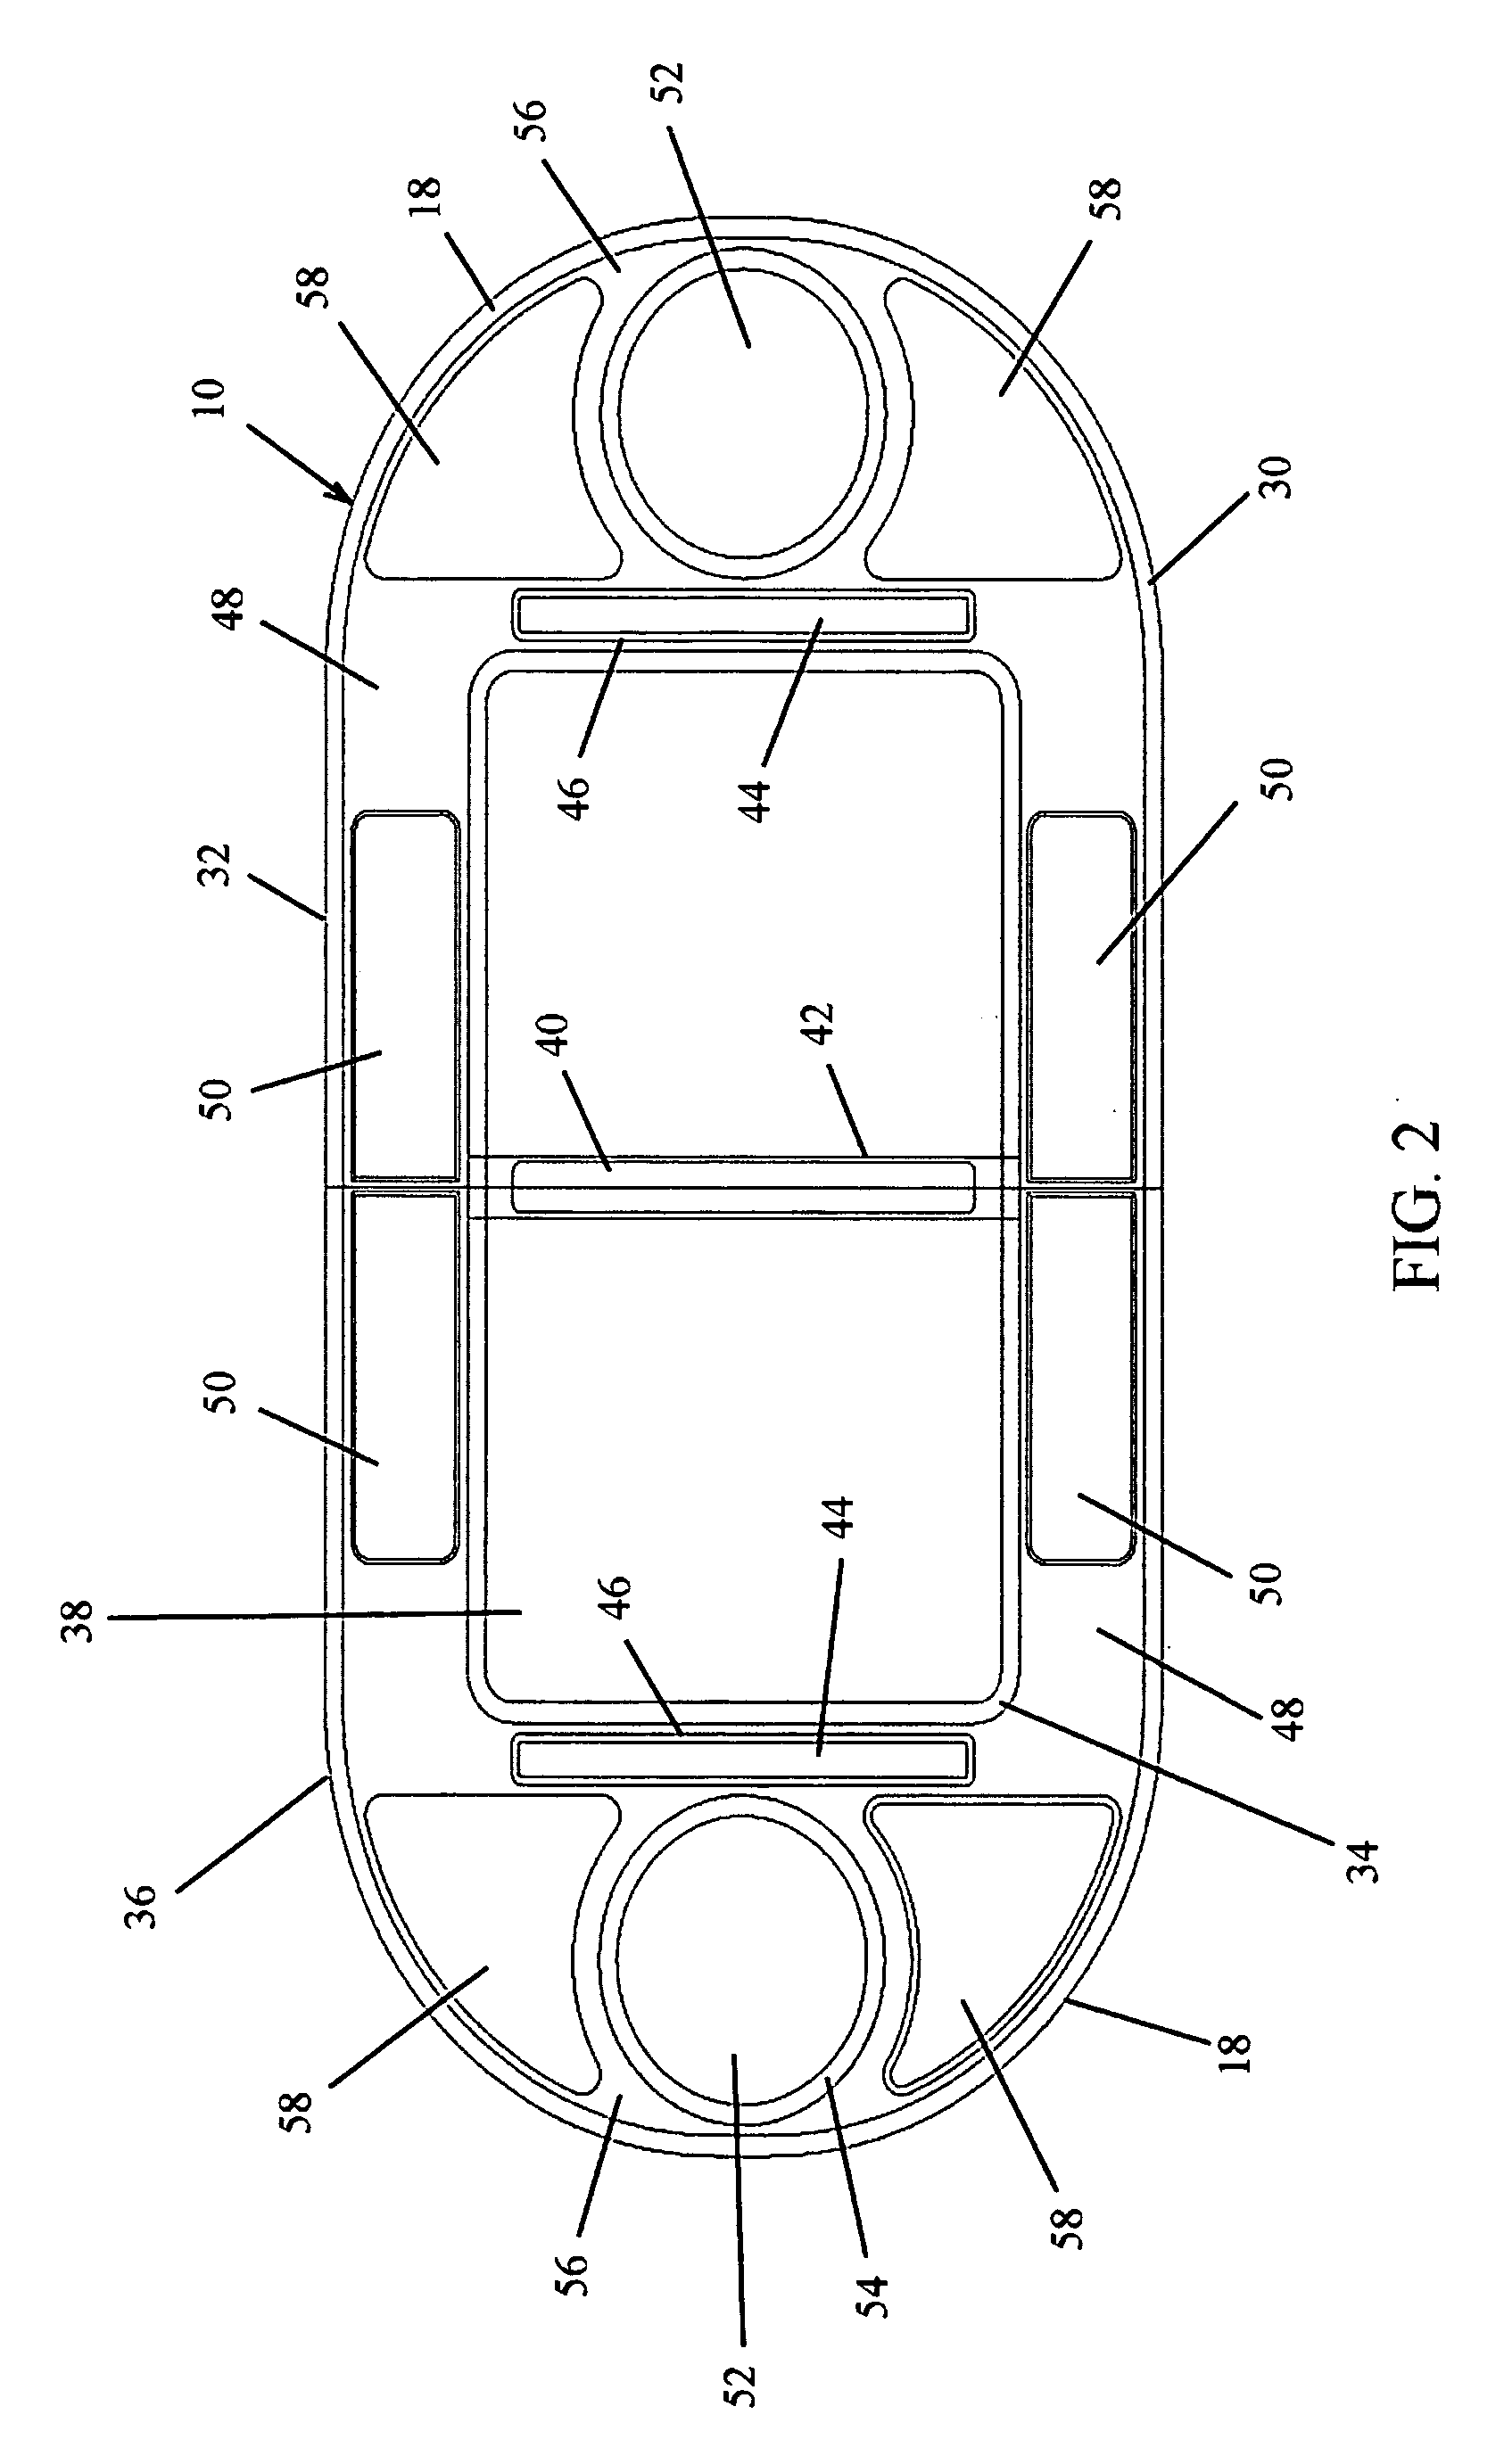 Portable health food pantry and method for managing a diet plan